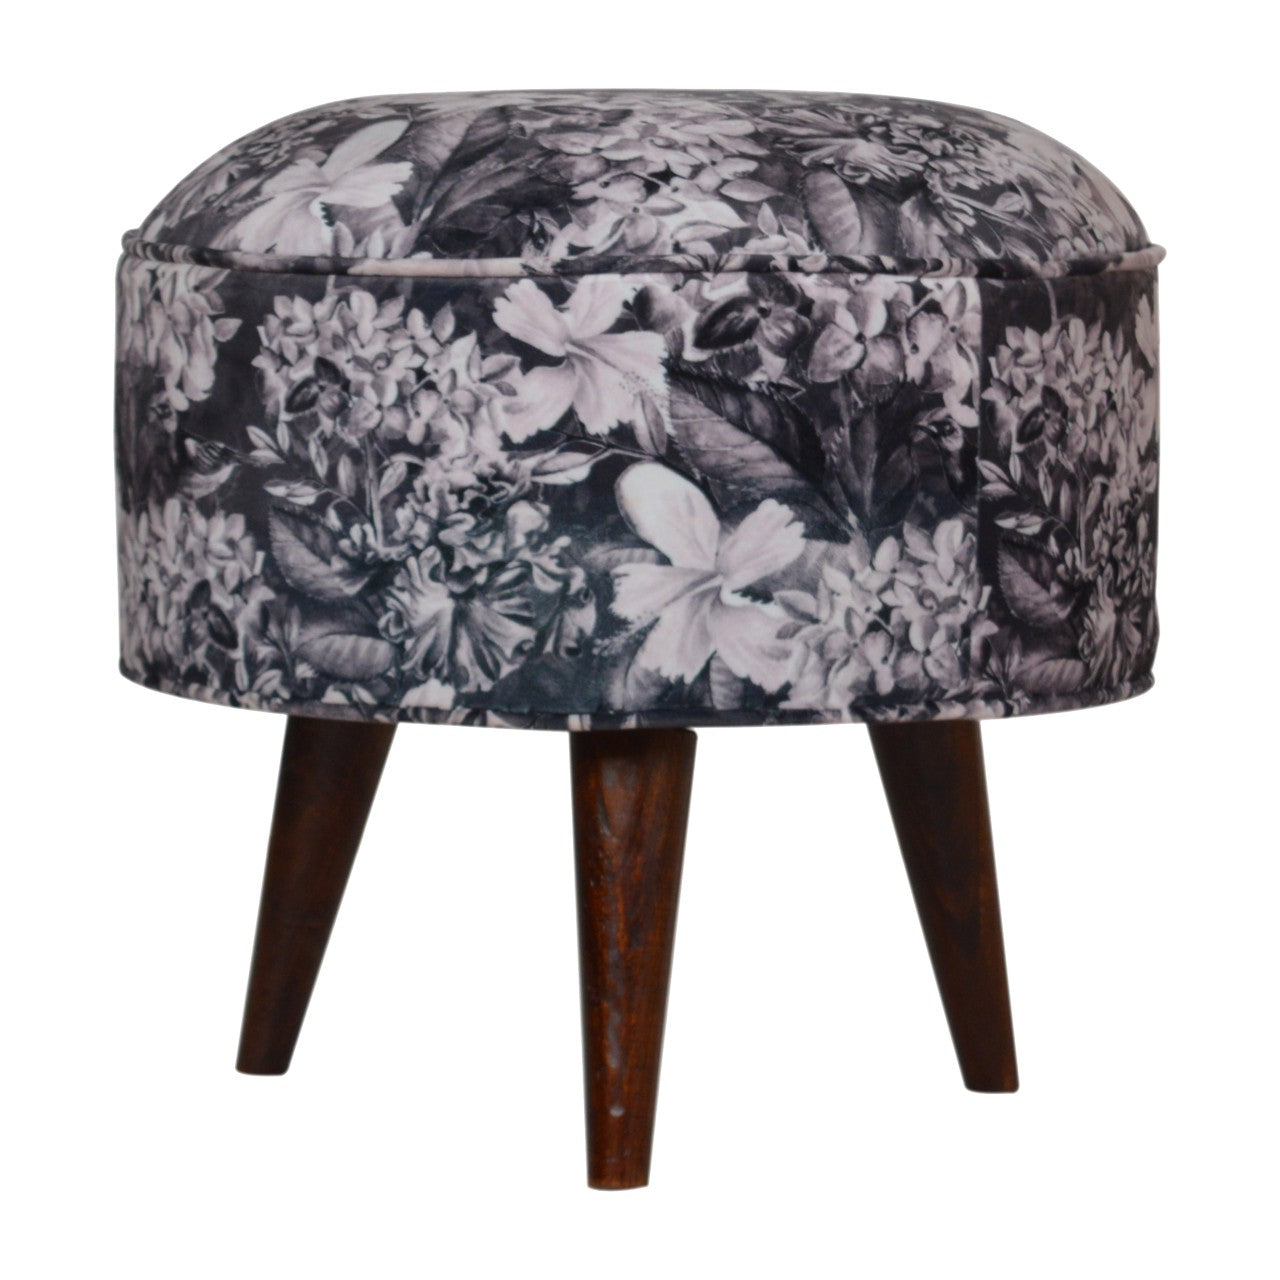 View Floral Print Footstool information